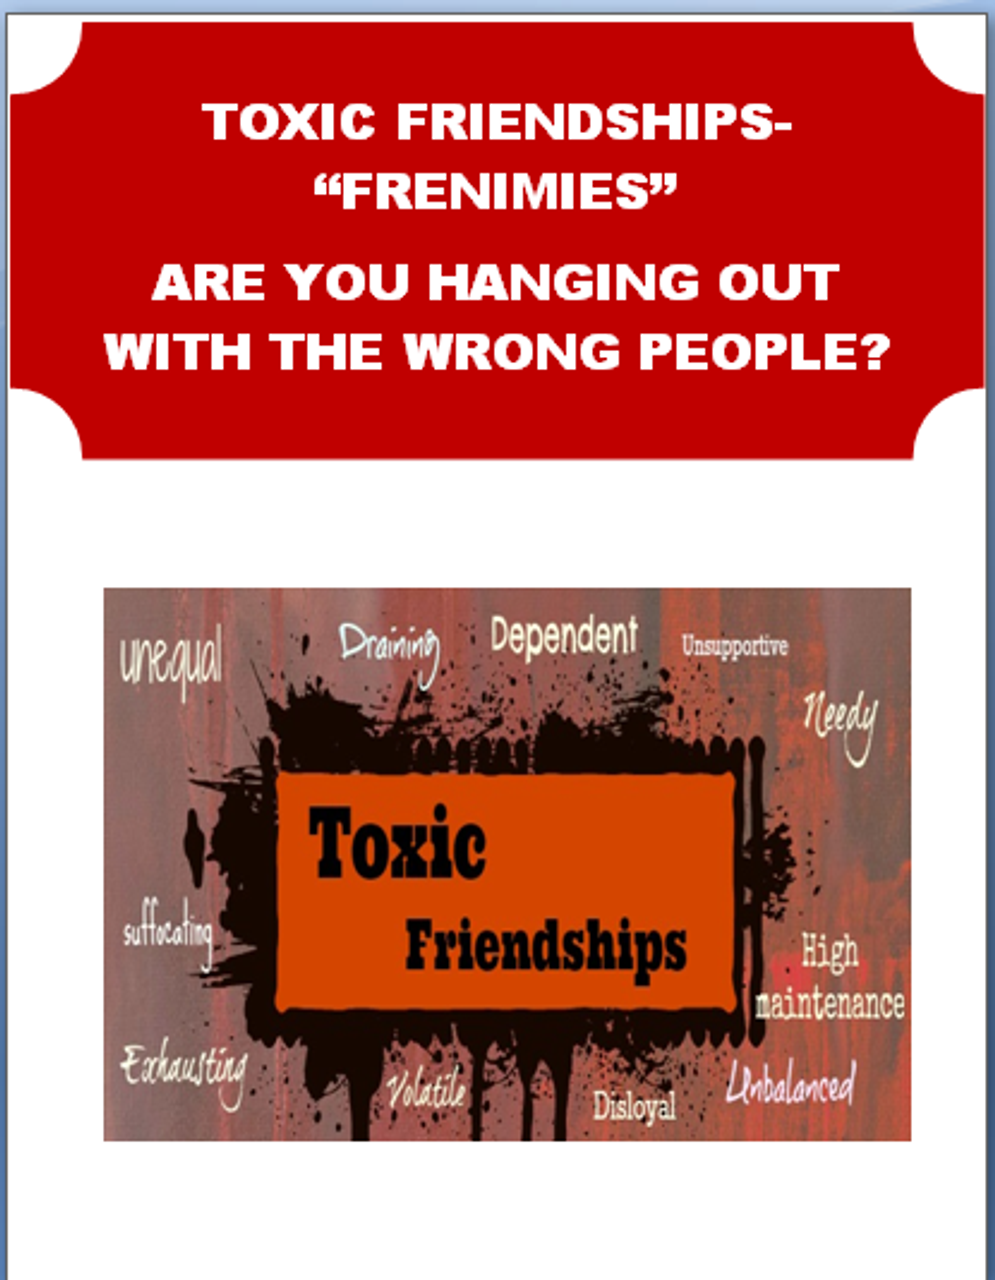 Toxic Friendships-Frenemies-Are you hanging out with the wrong people?